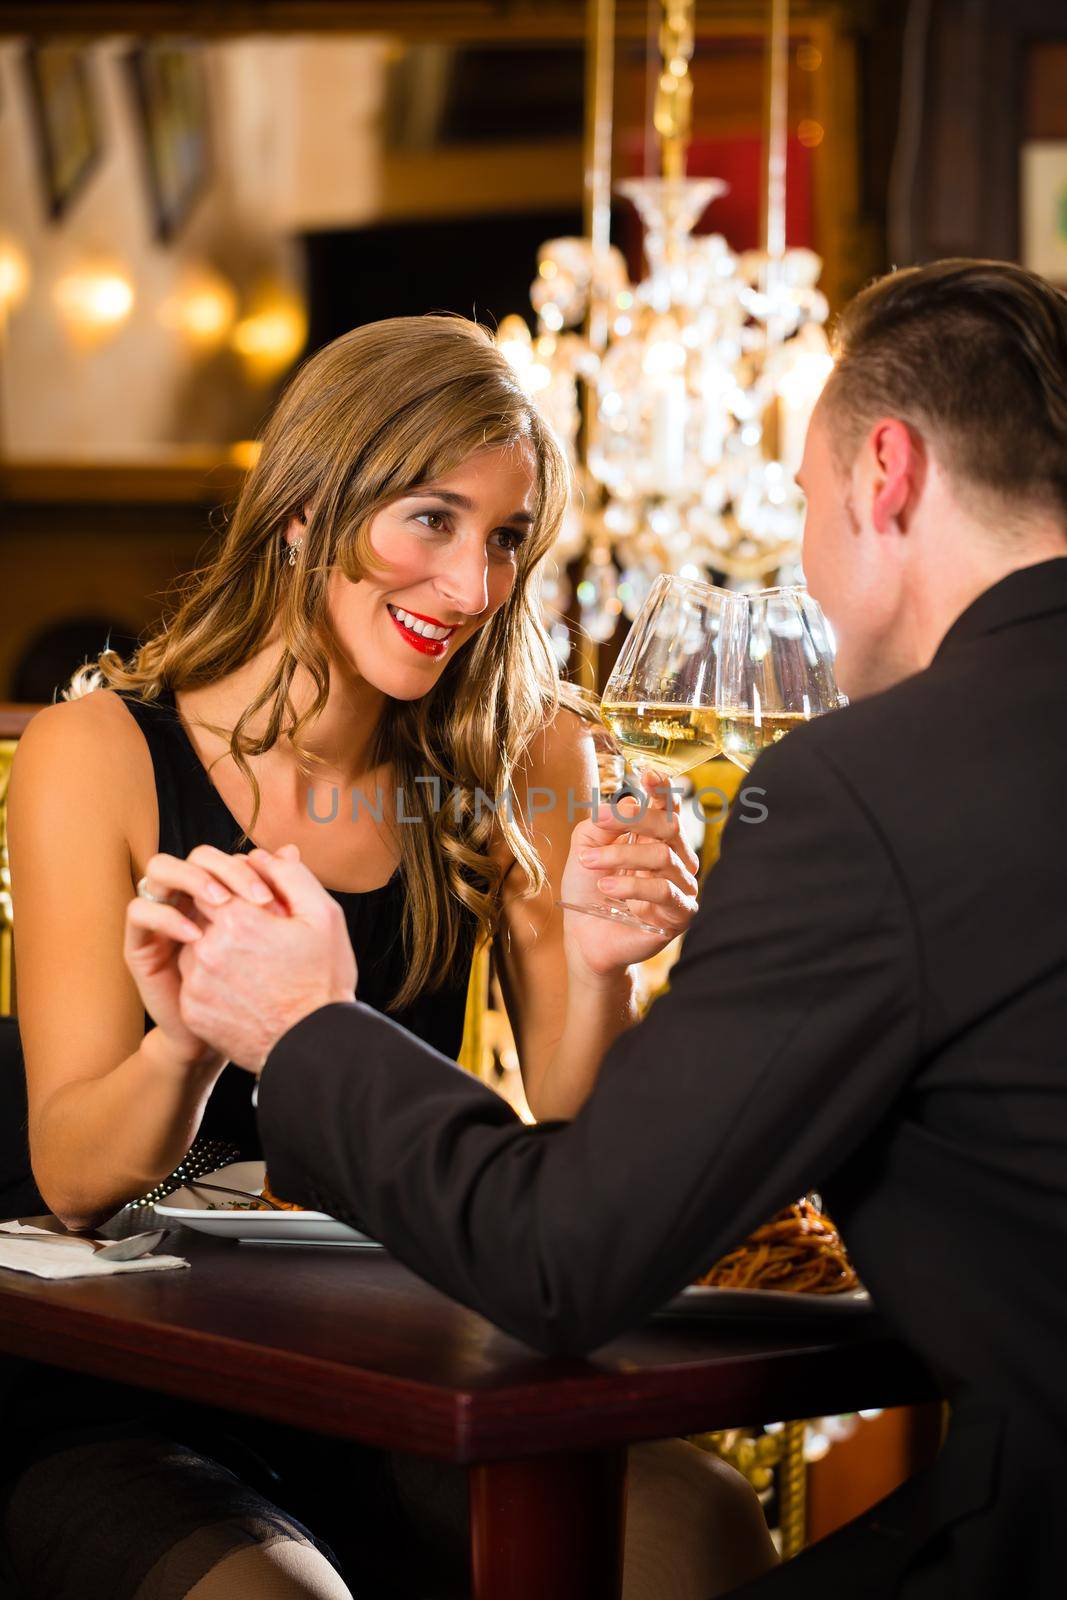 happy couple have a romantic date in a fine dining restaurant they drink wine and clinking glasses, cheers - a large chandelier is in Background